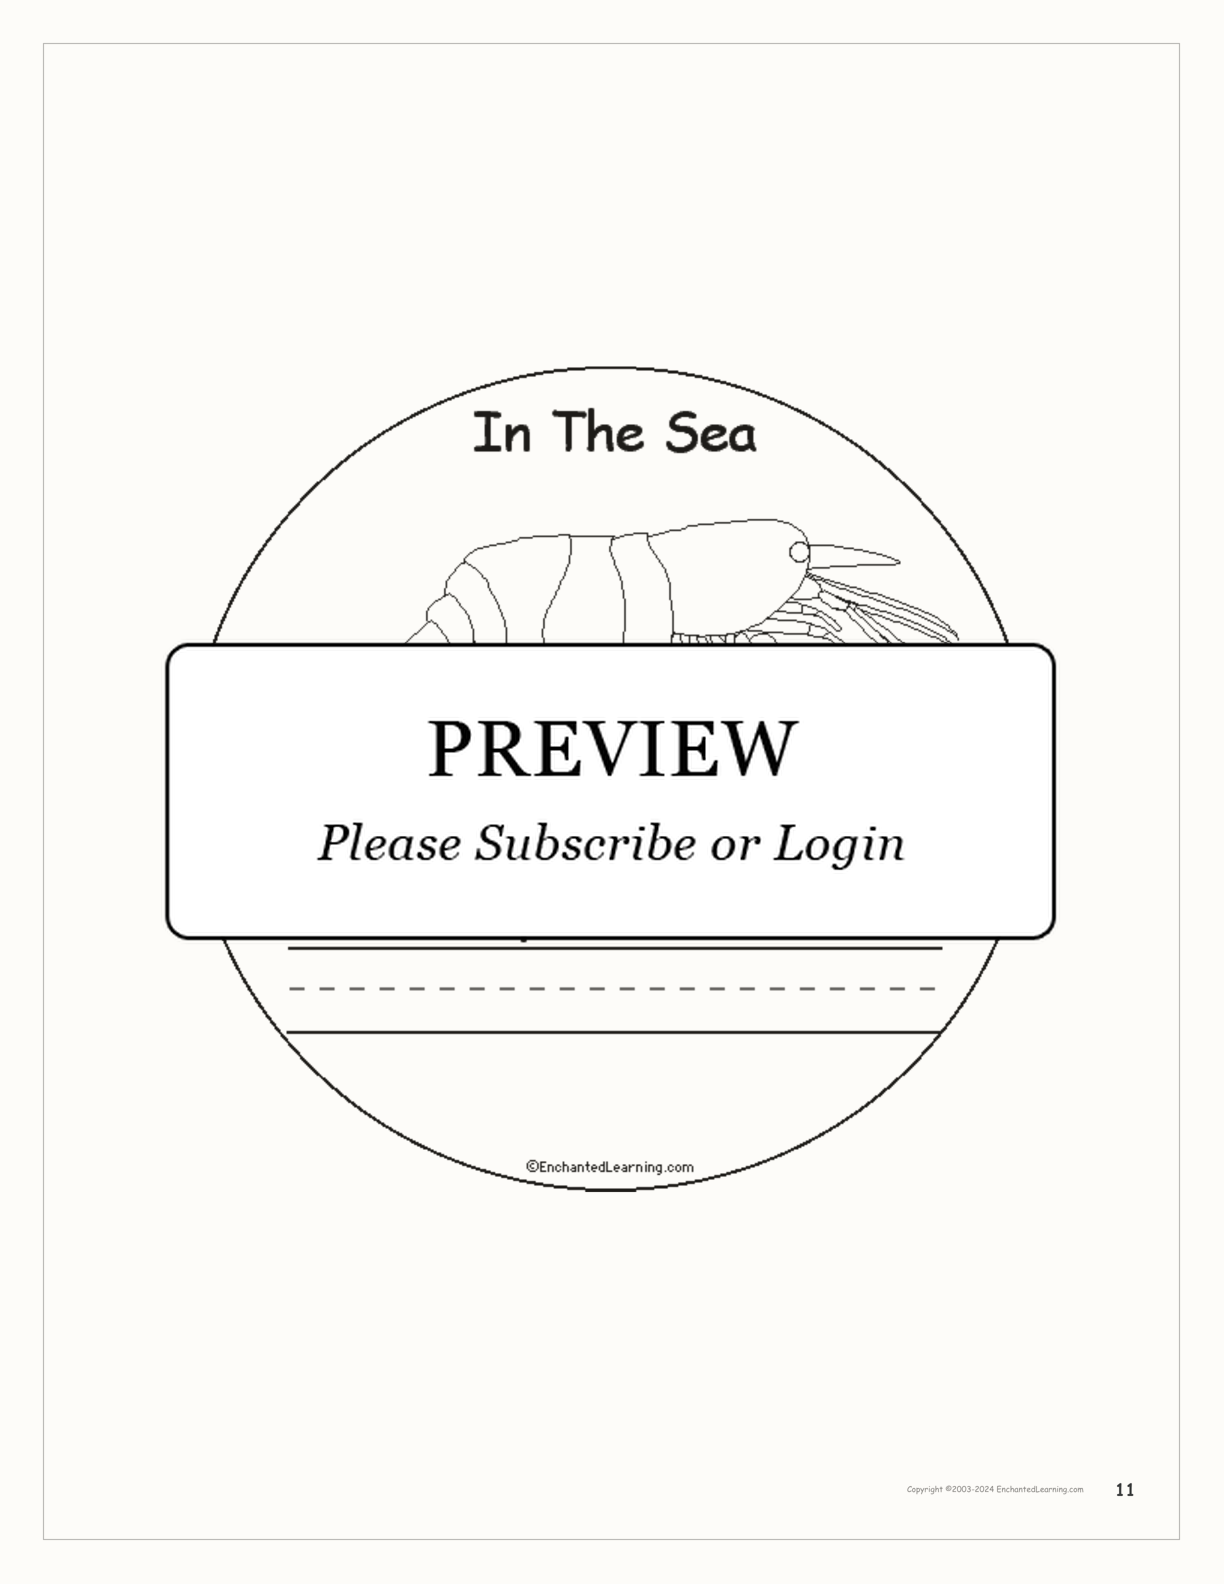 In The Sea: Early Reader Book interactive printout page 11